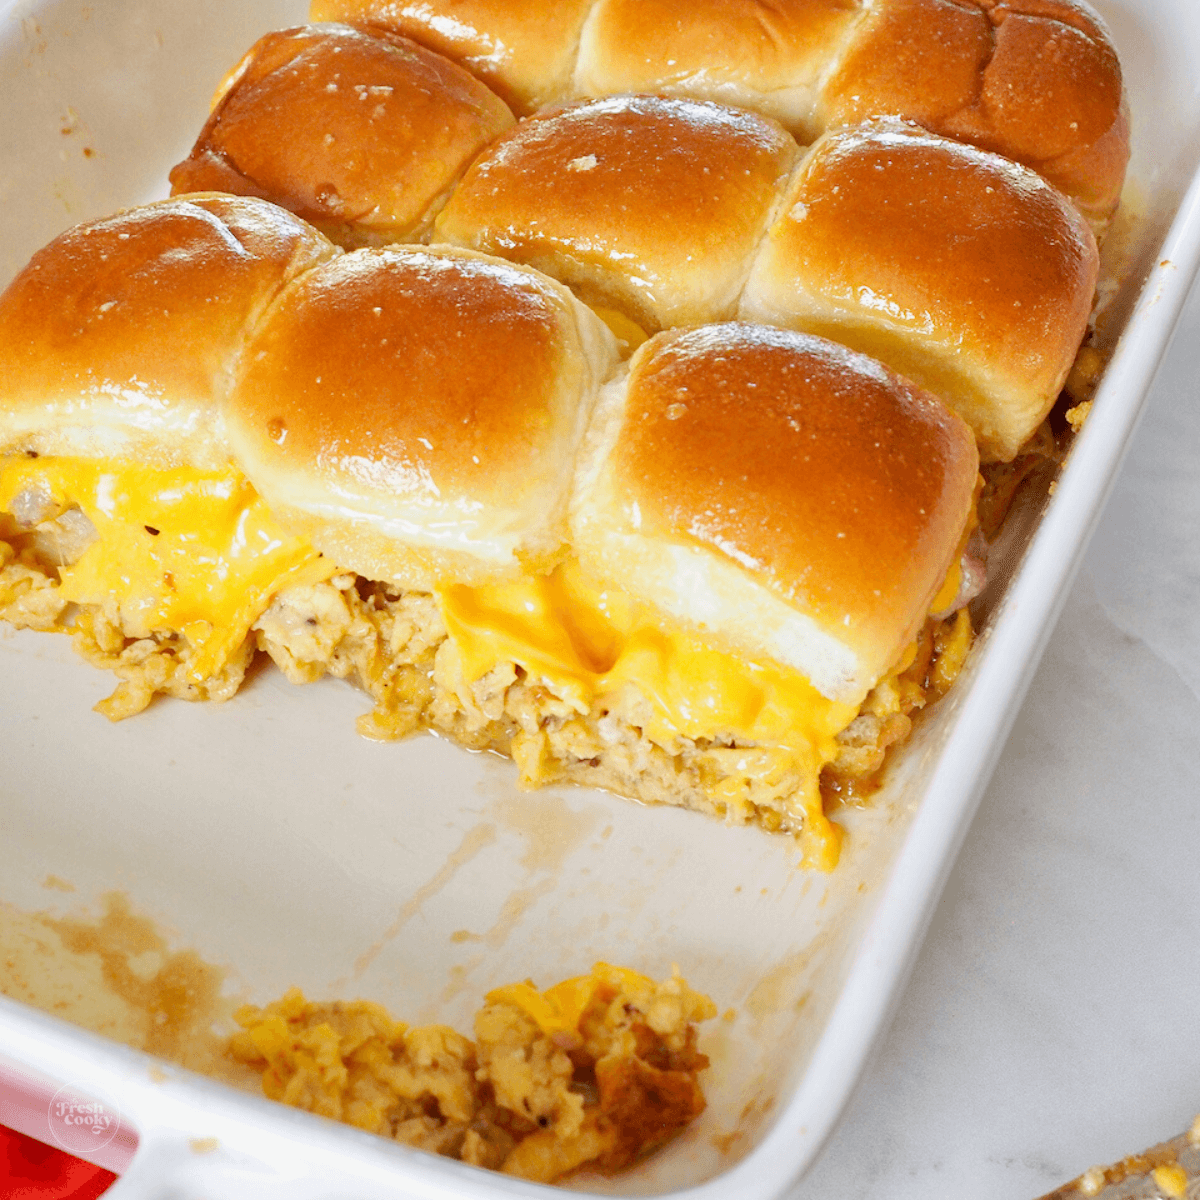 Egg sandwiches sliders in a baking dish with melty cheese.